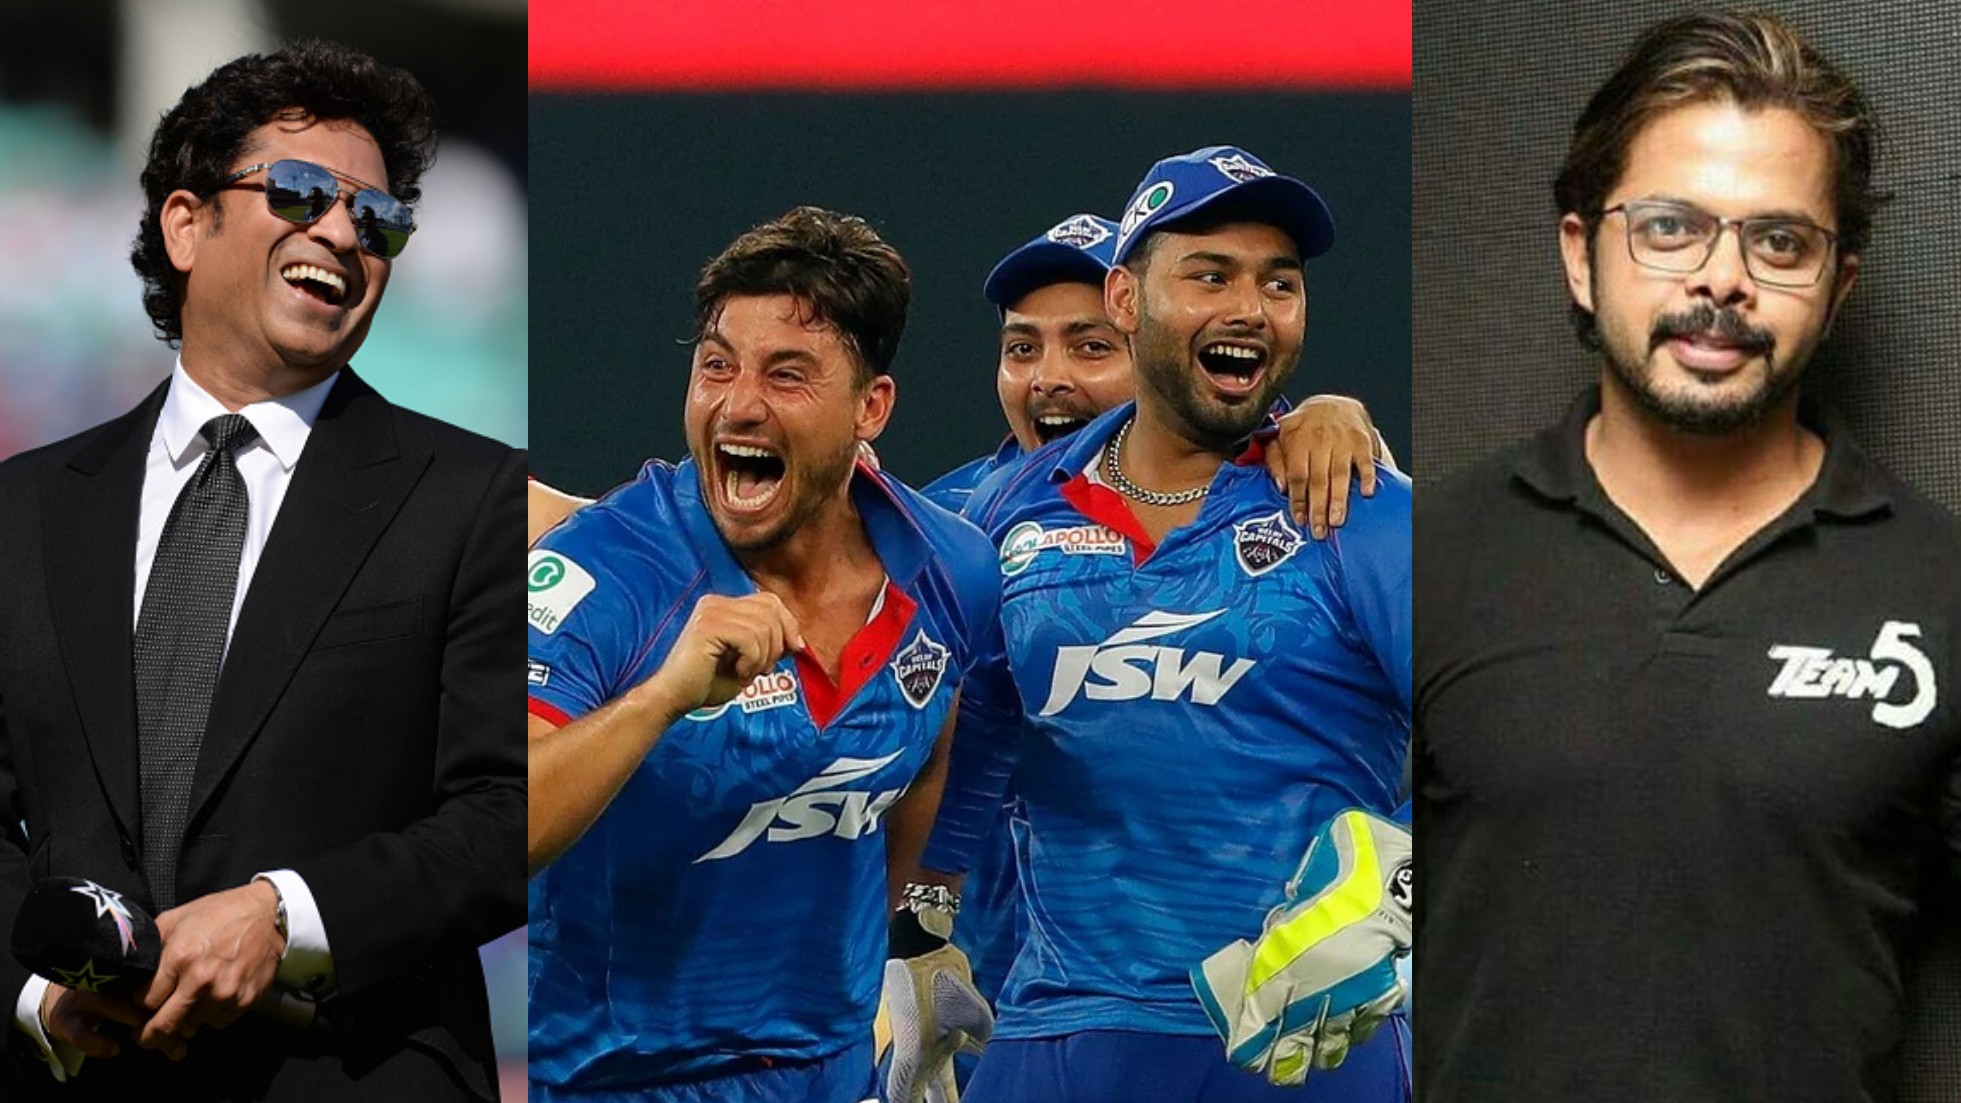 IPL 2020: Cricket fraternity lauds DC as they beat KKR by 18 runs in a high-scoring encounter